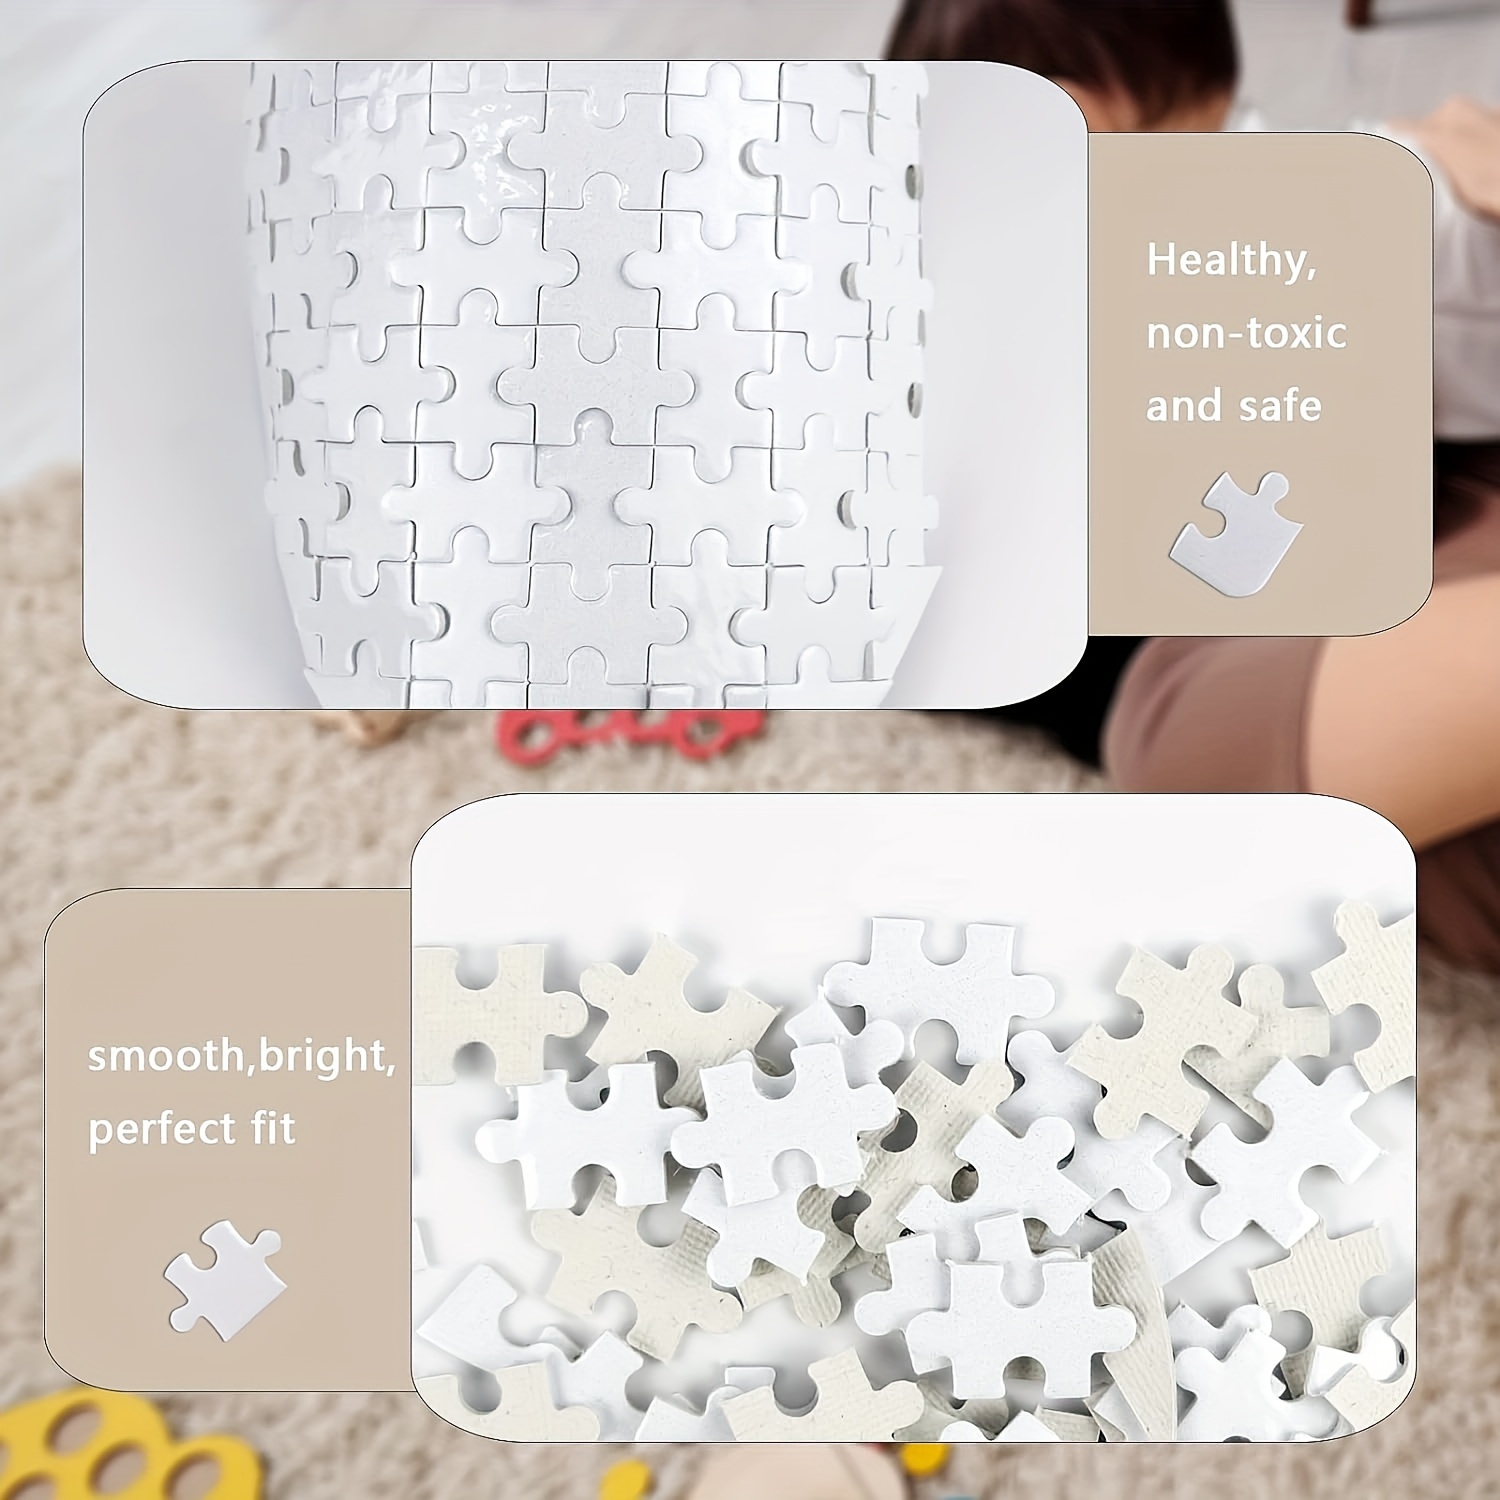  Totority 5 Set Sublimation Blank Puzzle Toys Transfer Craft  Puzzle Cognitive Plaything Blank Puzzles for Sublimation Thermal Transfer  Puzzle Transfer Puzzles Wood White Product Hot Pressing : Toys & Games